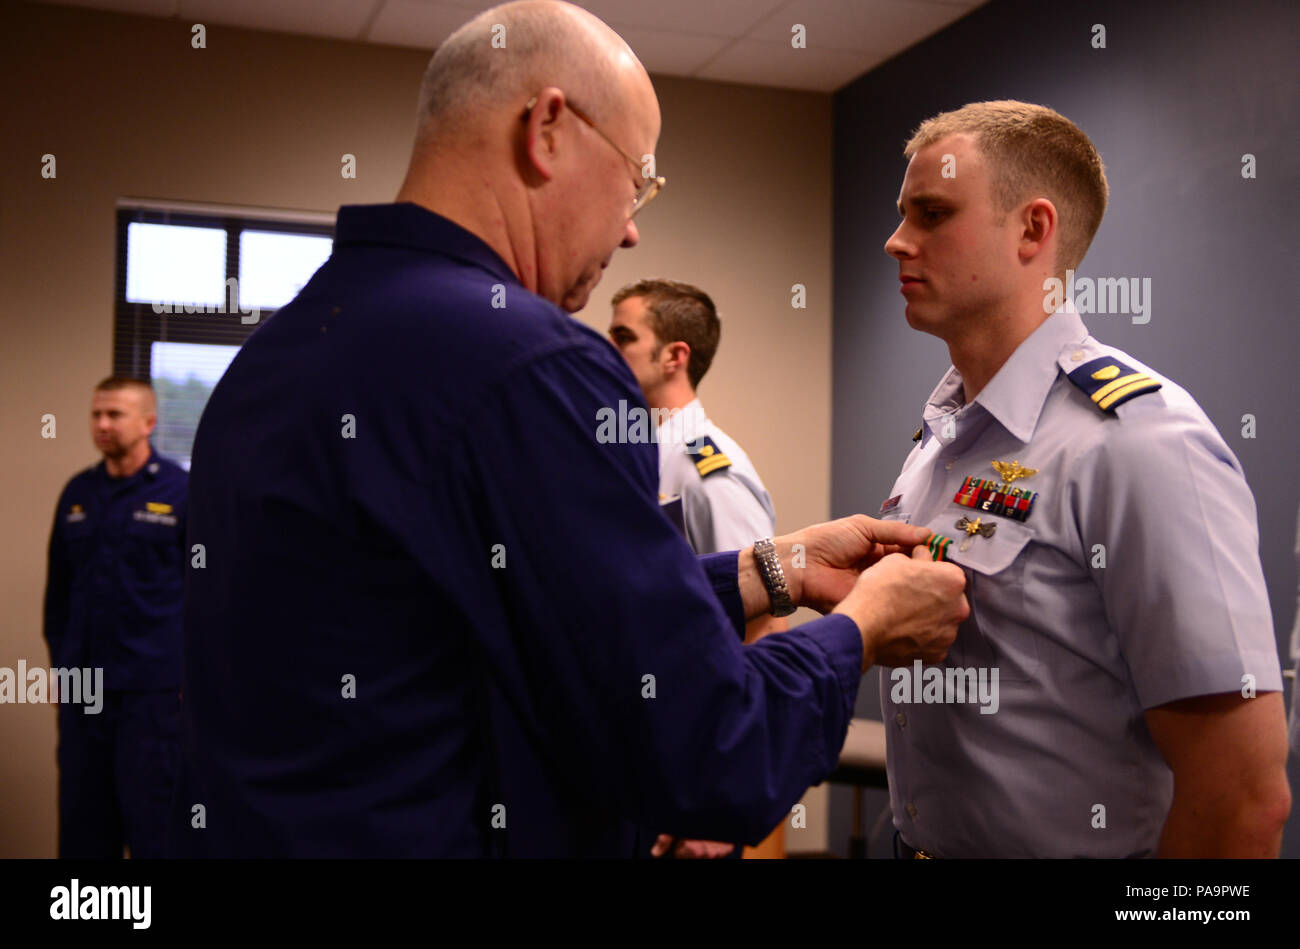 Rear Adm. Richard Gromlich, commander Coast Guard 13th District, presents Lt. Wesley Jones, an MH-65 Dolphin helicopter pilot at Coast Guard Air Station North Bend, Ore., with a Coast Guard Achievement Medal during an awards ceremony at Sector North Bend, March, 1, 2016. Jones was the co-pilot aboard a rescue helicopter during a rescue operation, which led to the rescue of four fishermen from the fishing vessel Jamie K after it ran aground near Cape Blanco, Ore., in July 2015. (U.S. Coast Guard photo by Petty Officer 1st Class Levi Read) Stock Photo